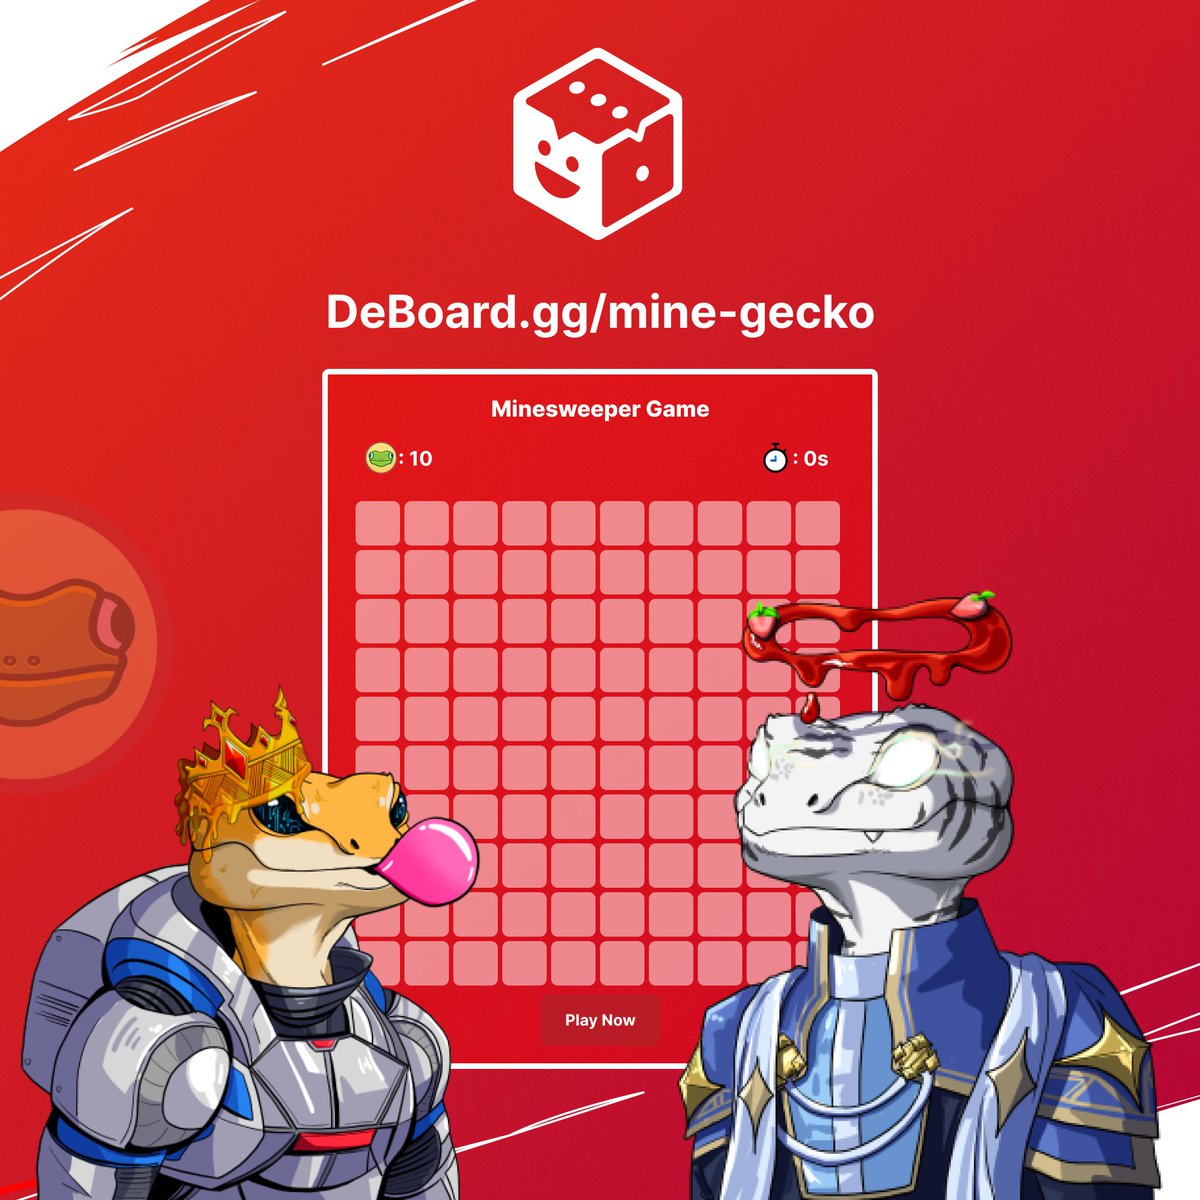 🚀 Introducing the MineGecko Game by DeBoard! 🐸

🕹️ Inspired by the classic Minesweeper and the adorable @GeckoInuAvax 🐸, this new game is sure to keep you on your toes! Ready to test your skills?

🎮 Play now: 🫴deboard.gg/mine-gecko

#Deboard #DEVAX $DEVAX #Playtogether…